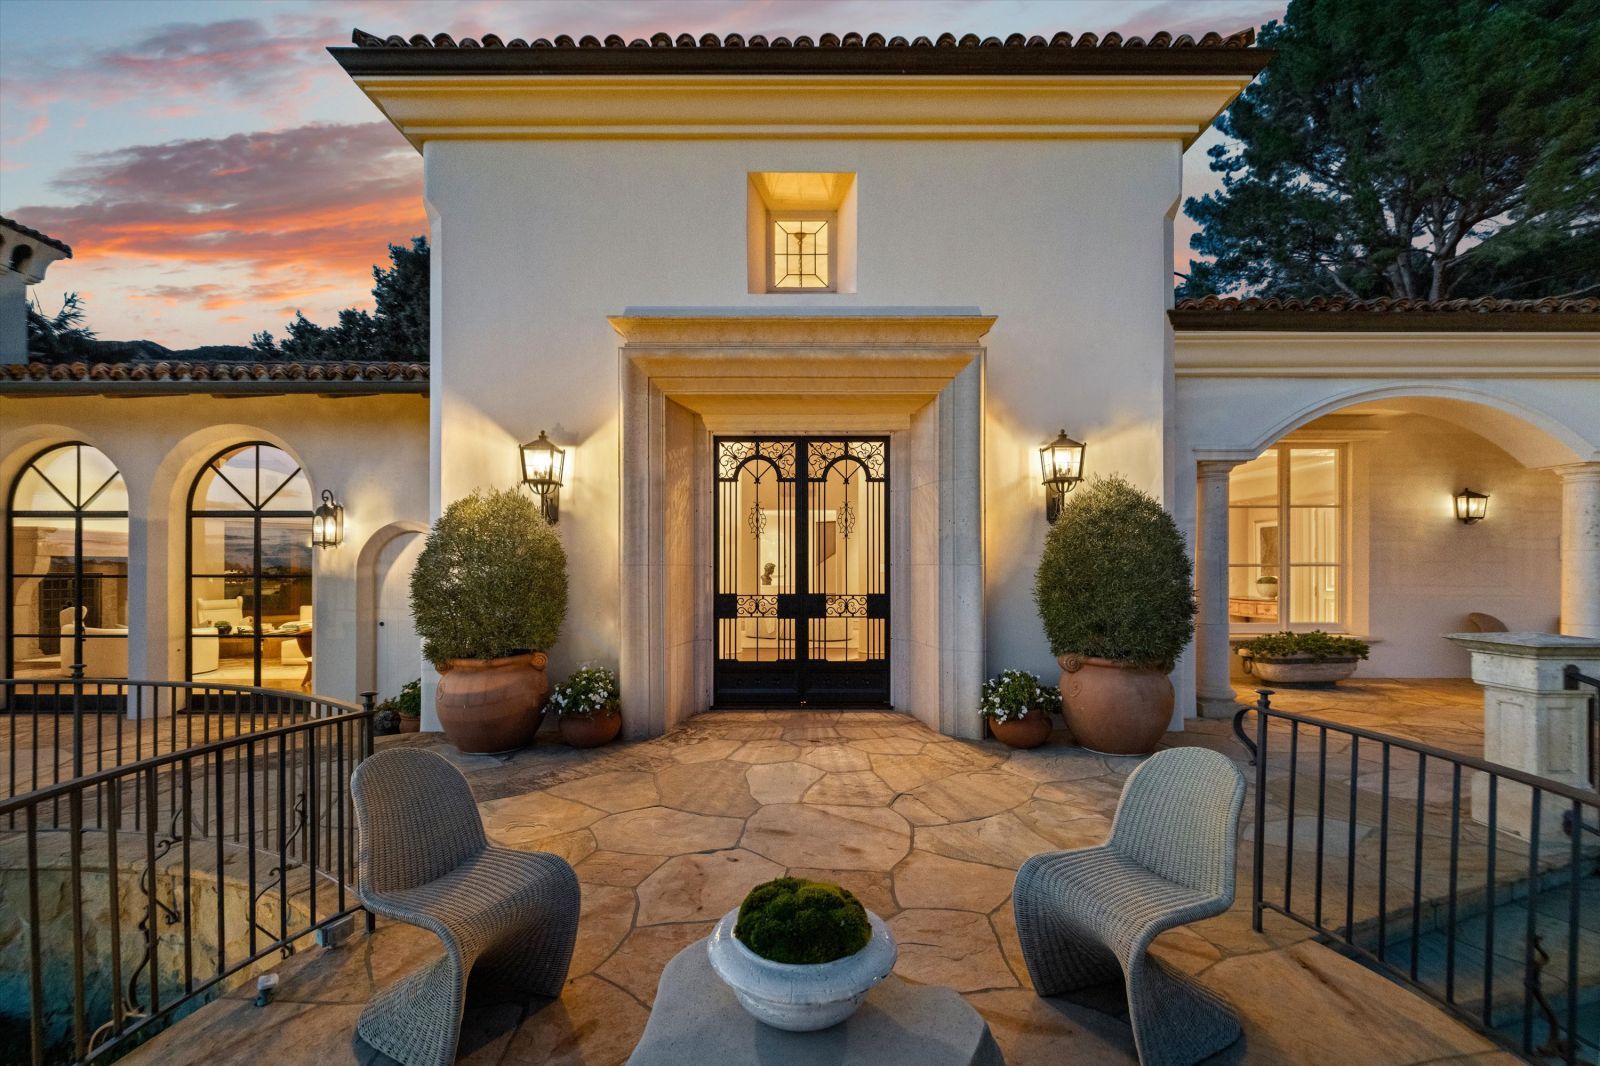 French doors leading to a patio of a Mediterranean estate reminiscent of a palazzo.